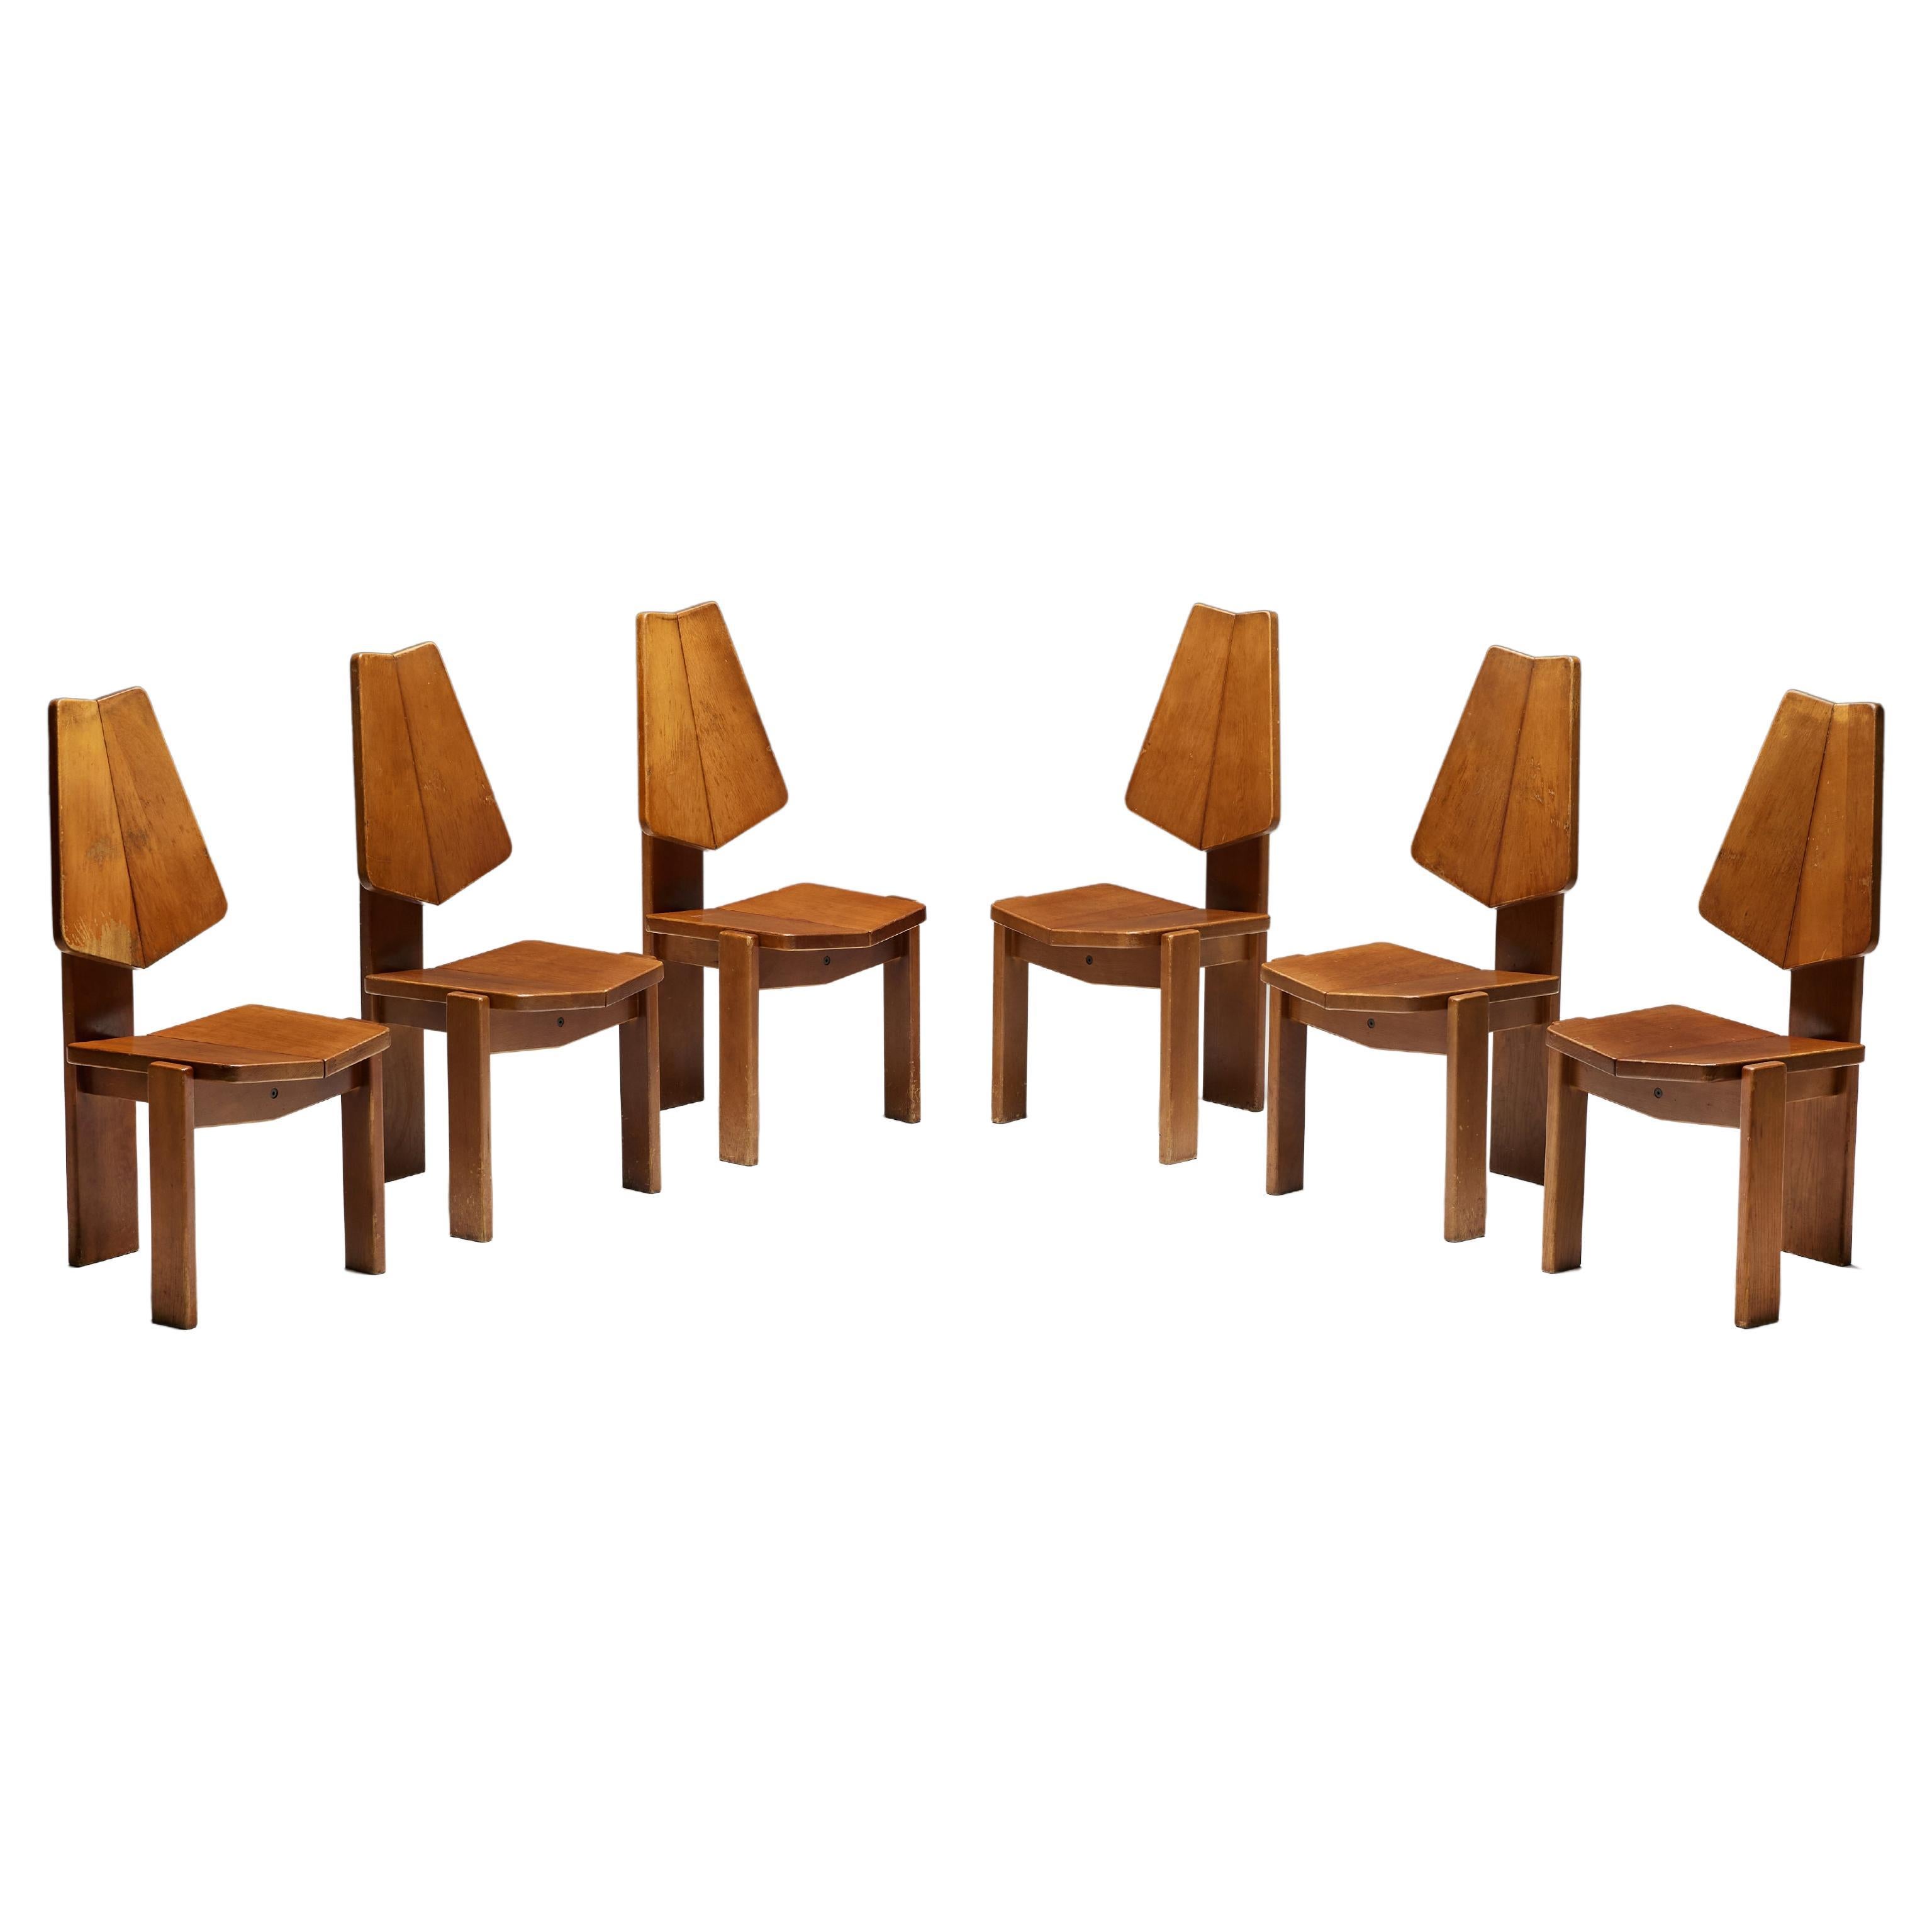 Brutalist Wooden Dining Chairs, Belgium, 1970s For Sale